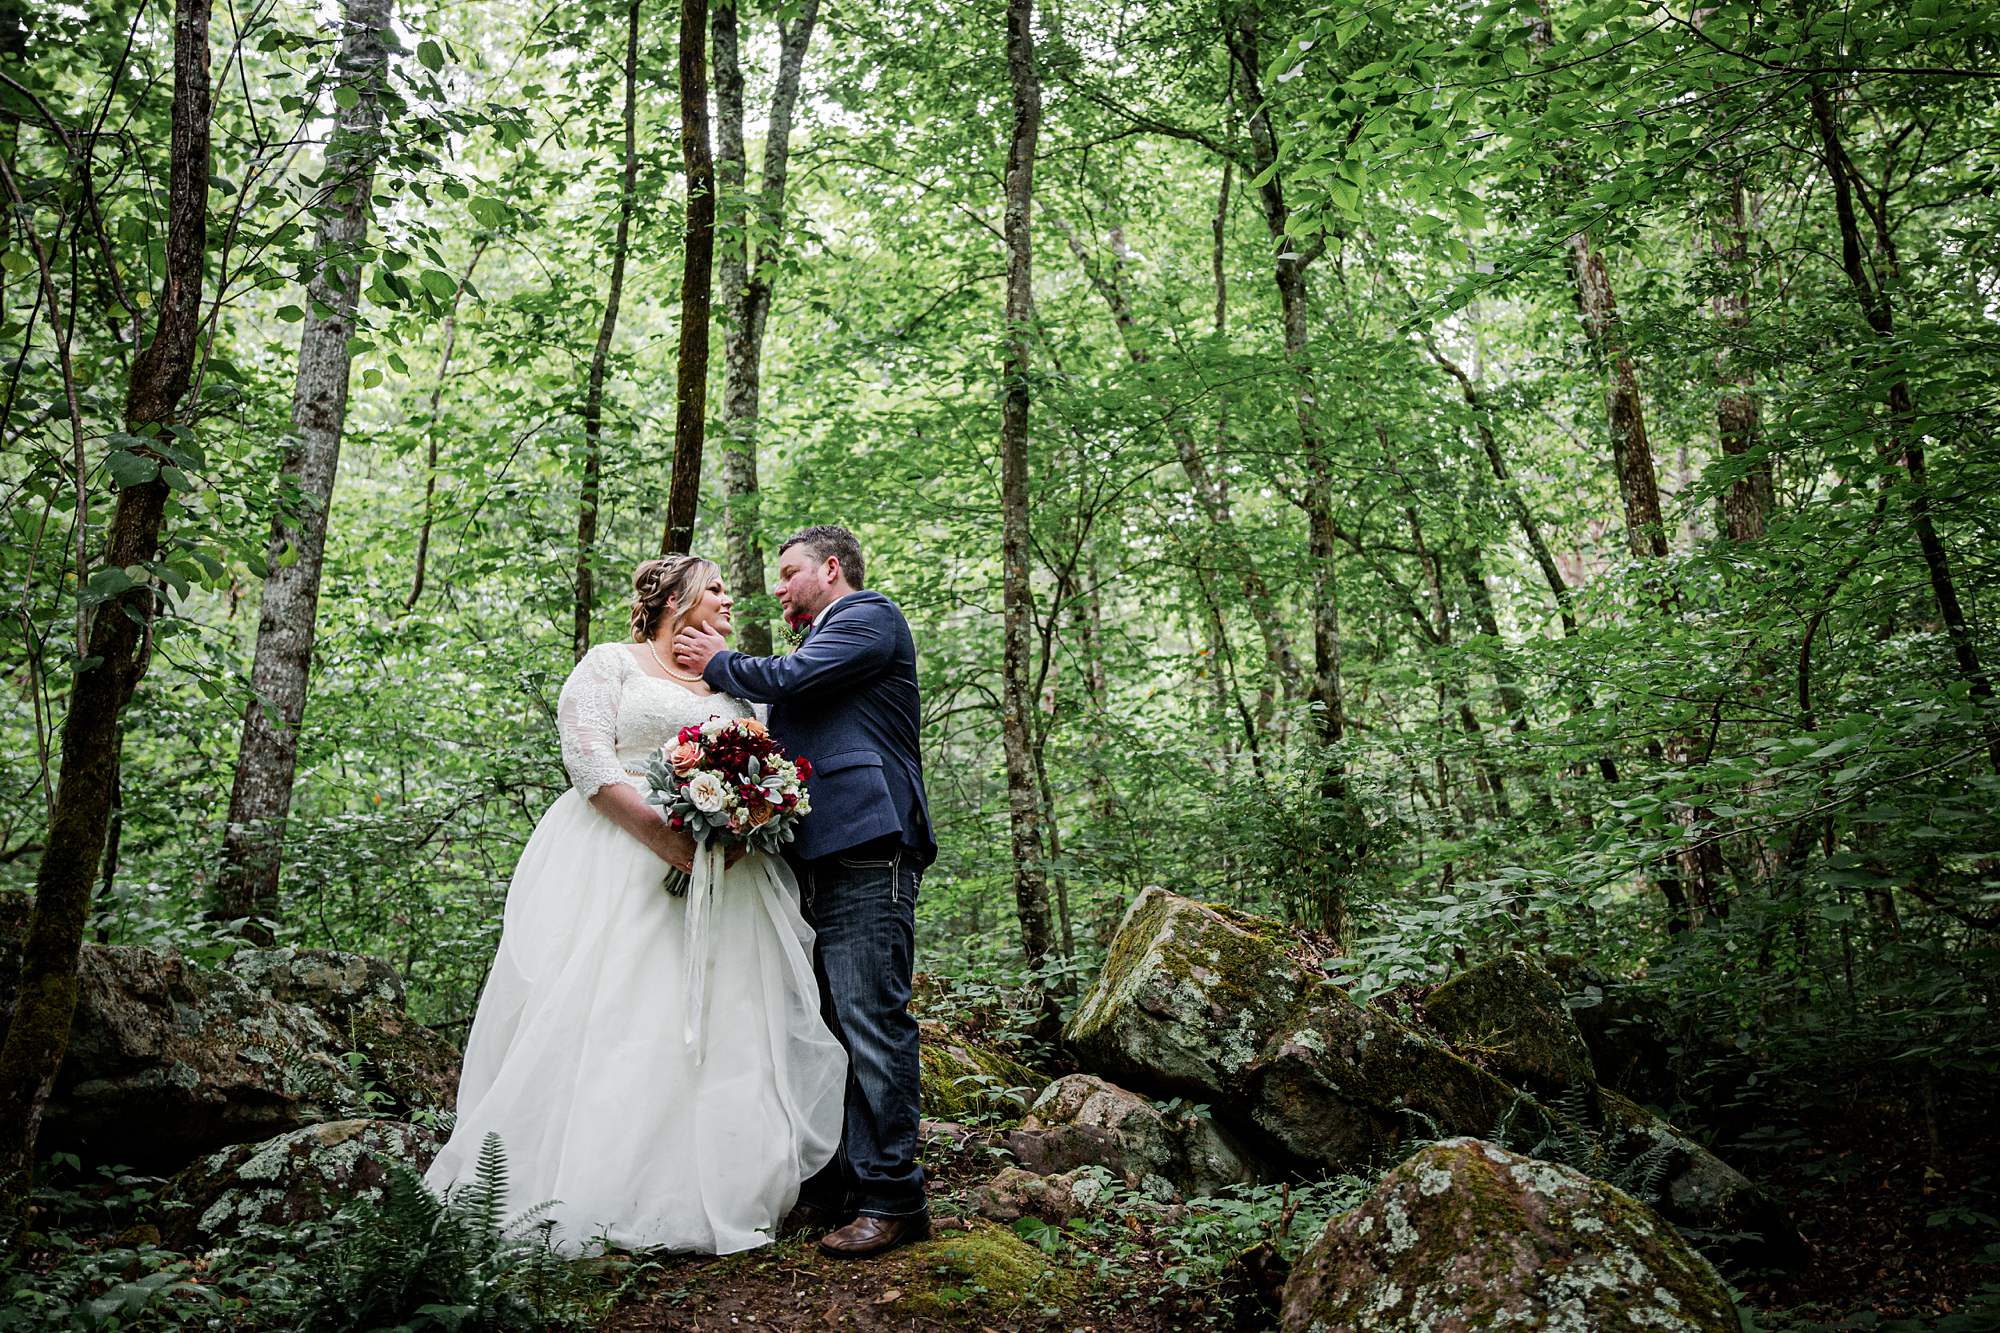 Getting married in the Smoky Mountains